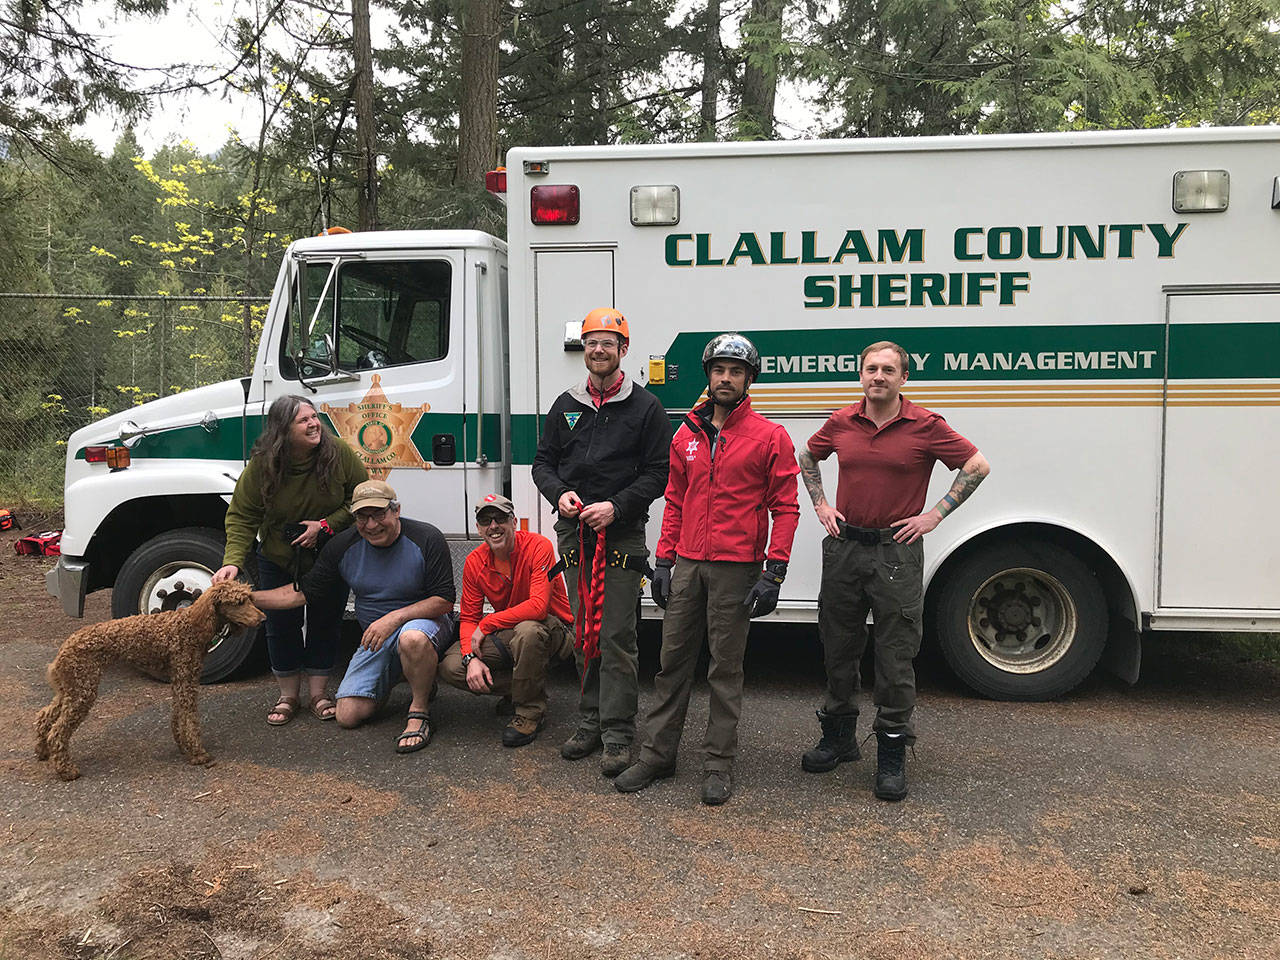 The Clallam County Sheriff Search and Rescue team poses for a photo after saving a 7-month-old puppy named Zola.